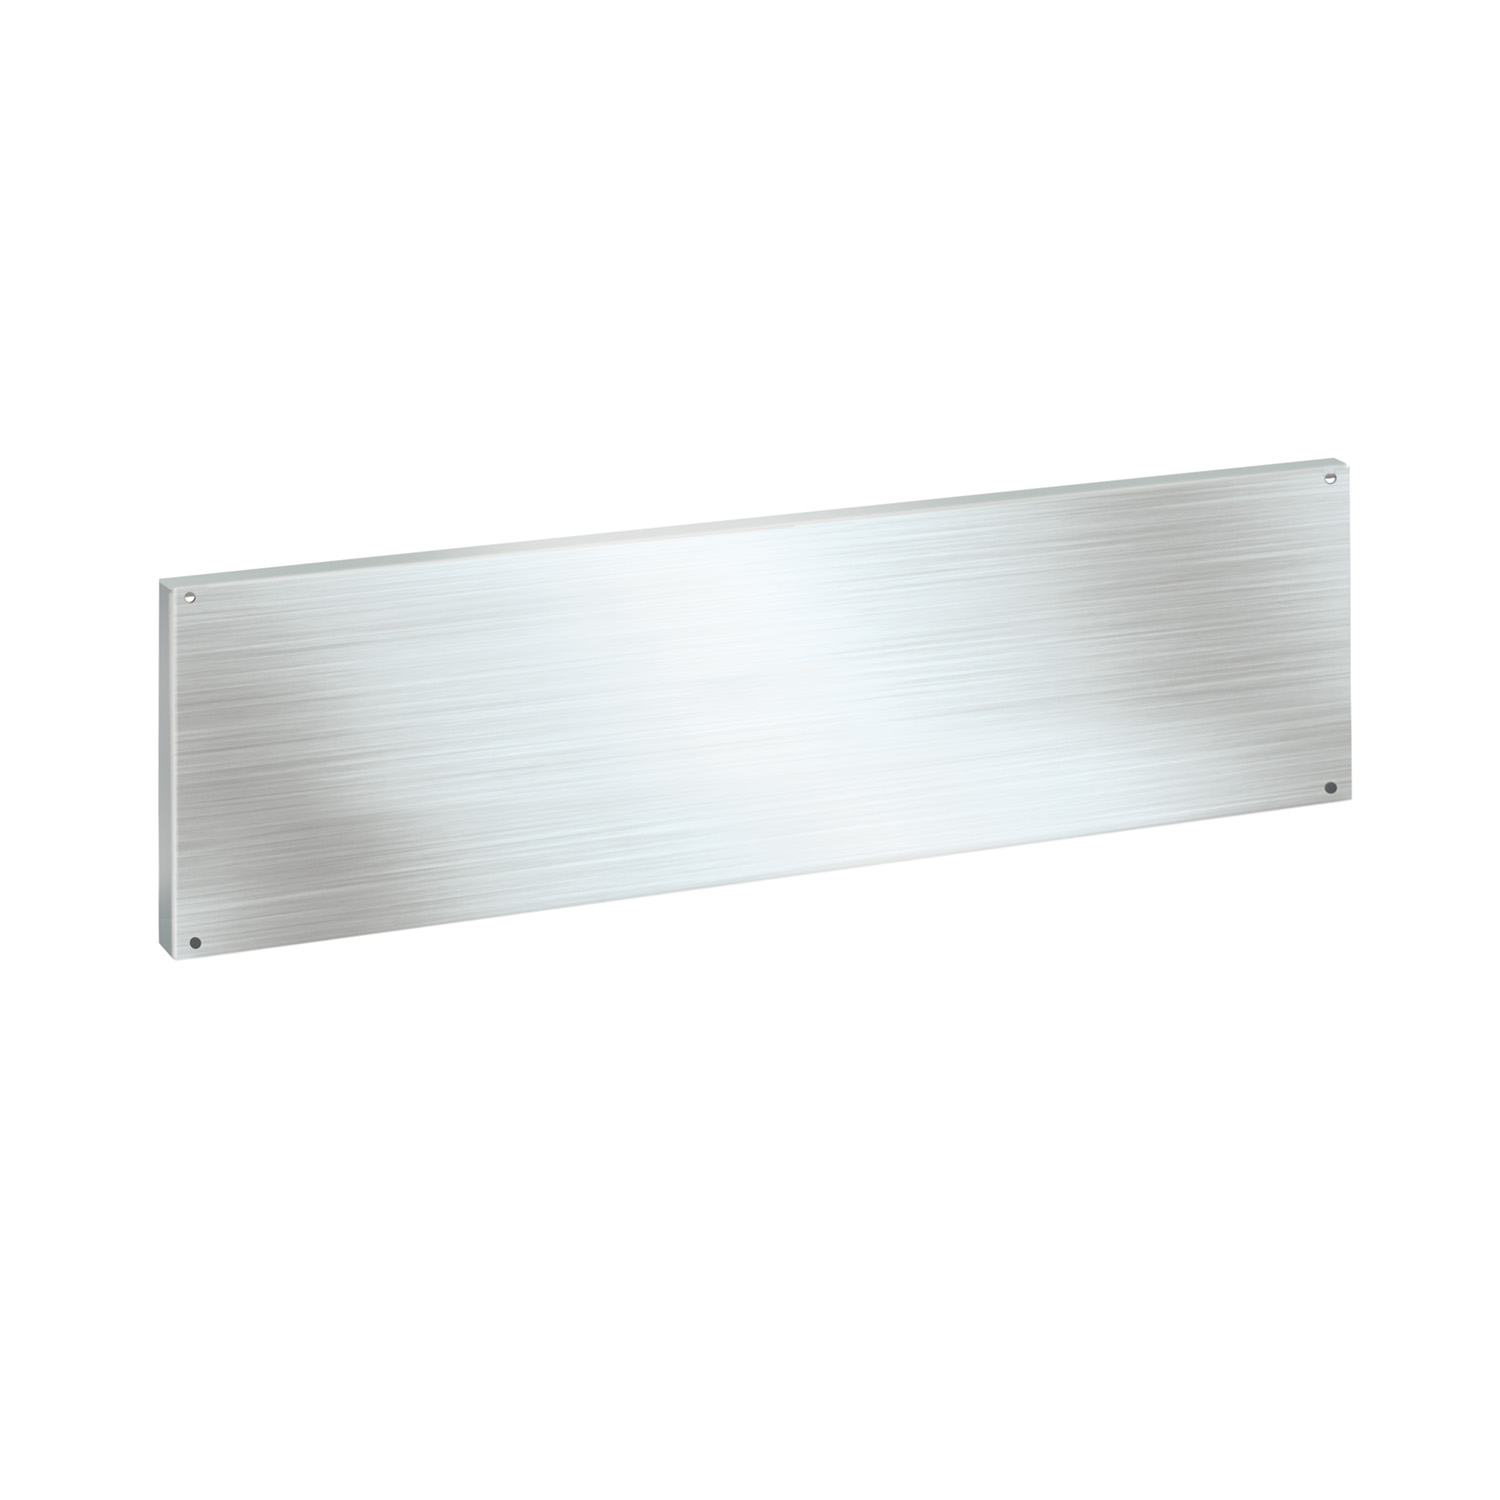 Stainless steel back panel (300 x 1200mm)